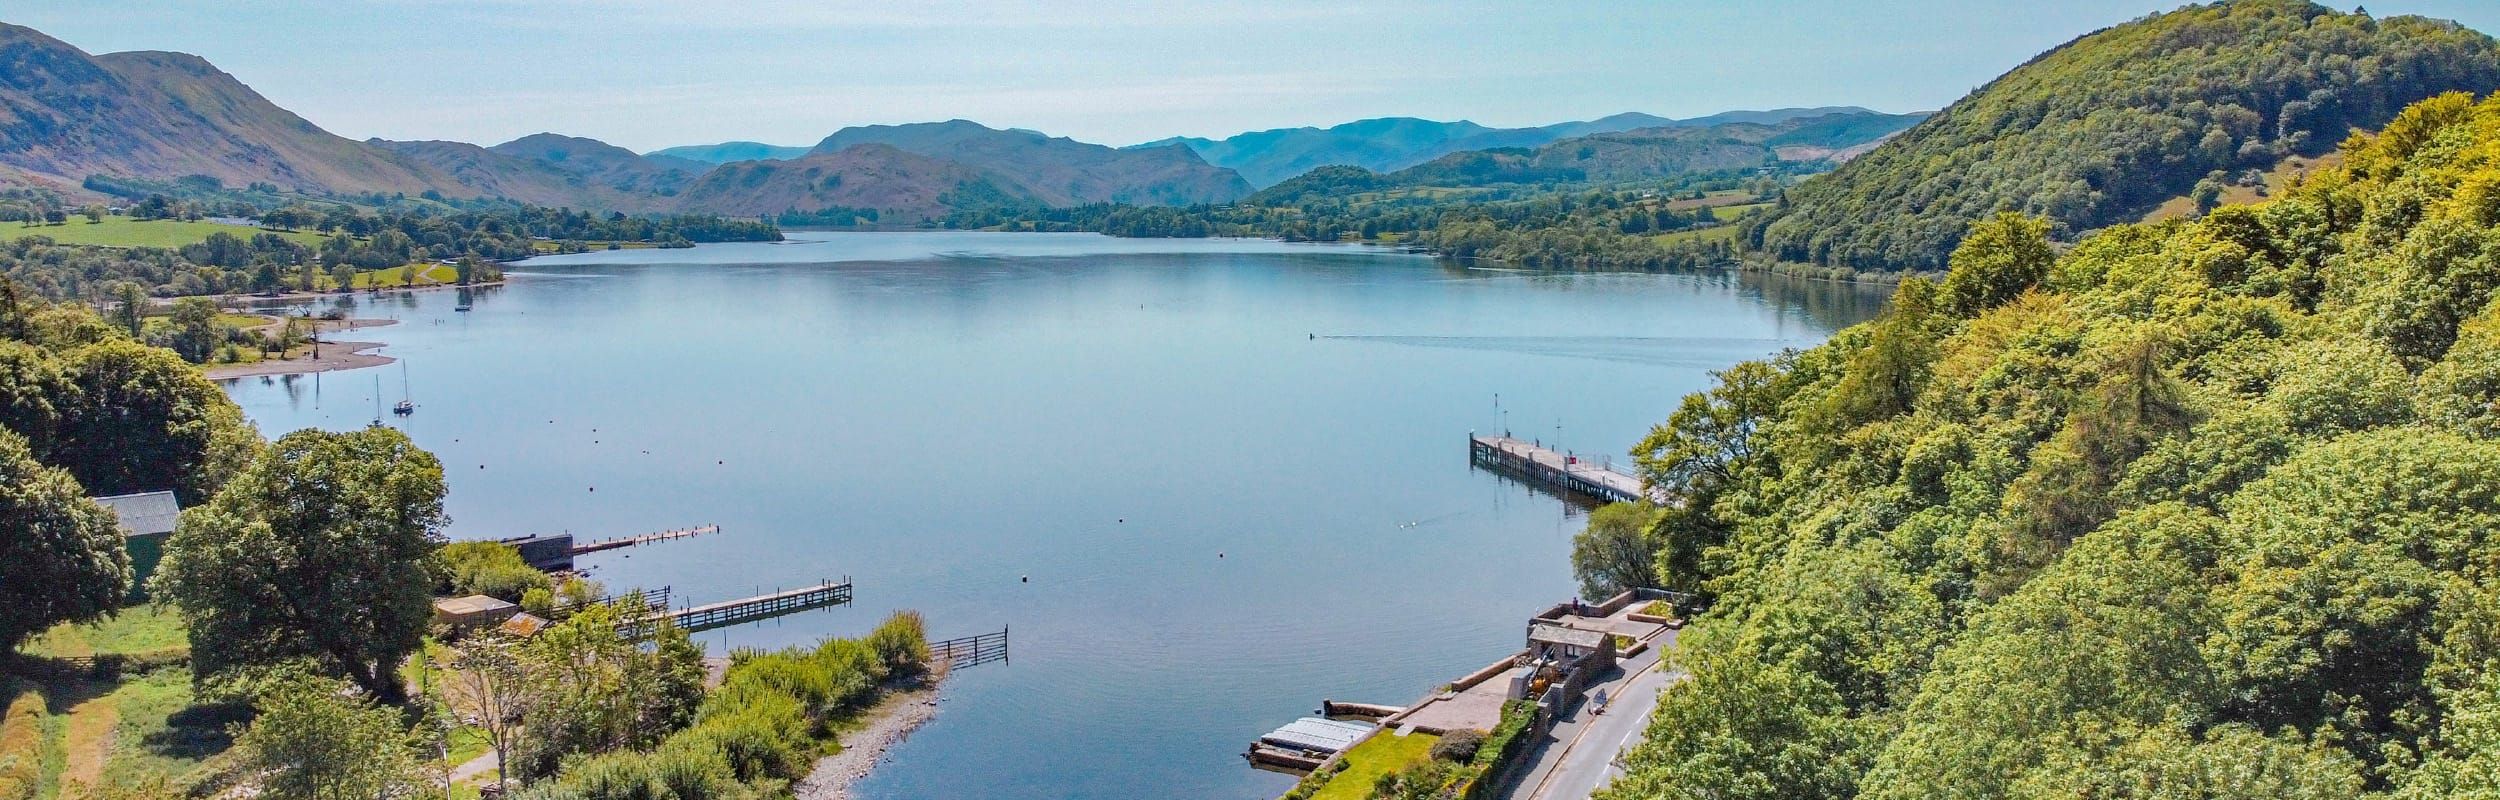 View from above Pooley Bridge pier looking out on the Ullswater scenery 